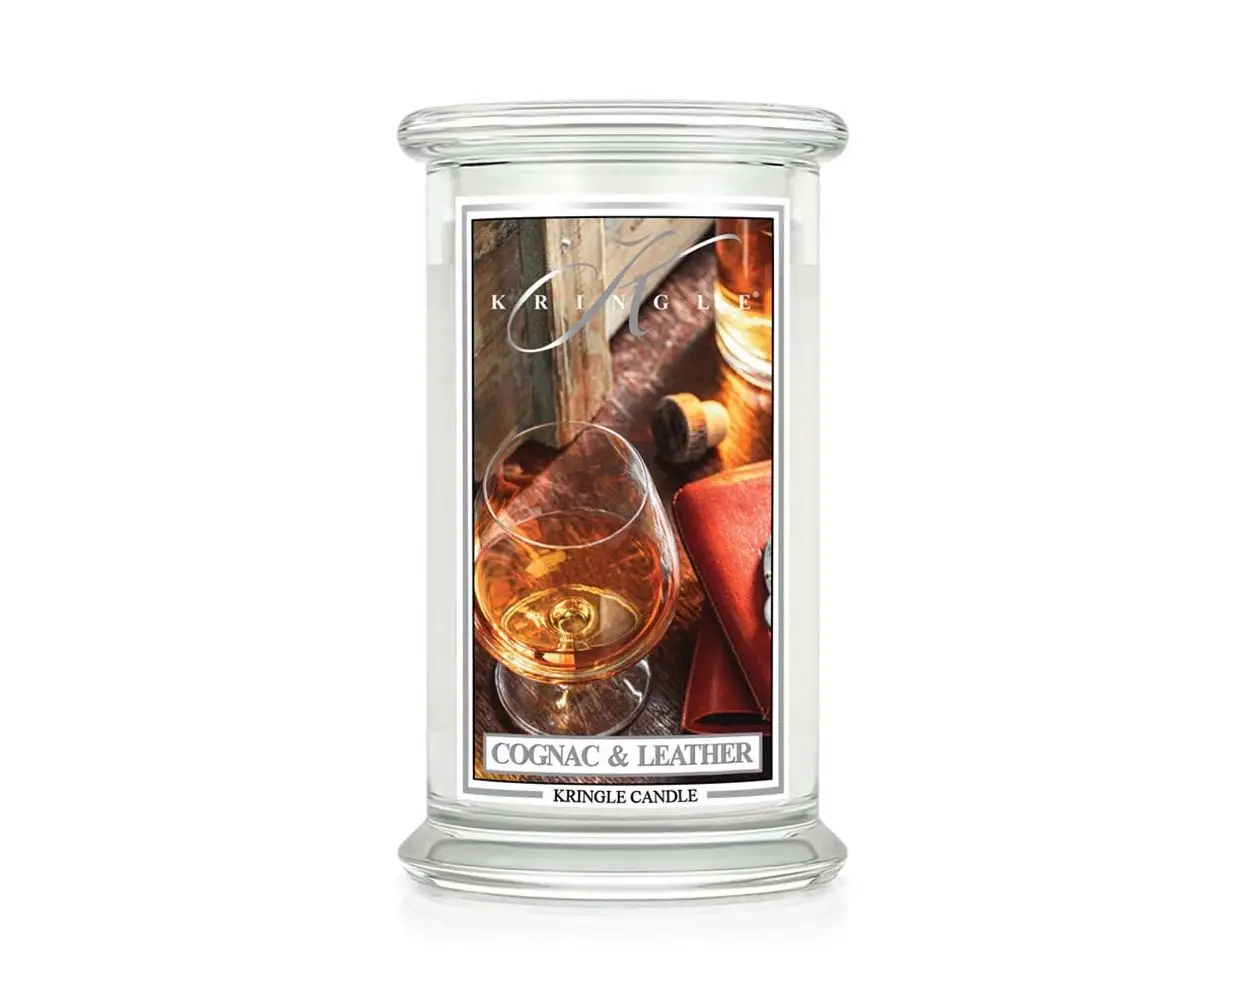 Gro脽e Classic Candle & Cognac Leather